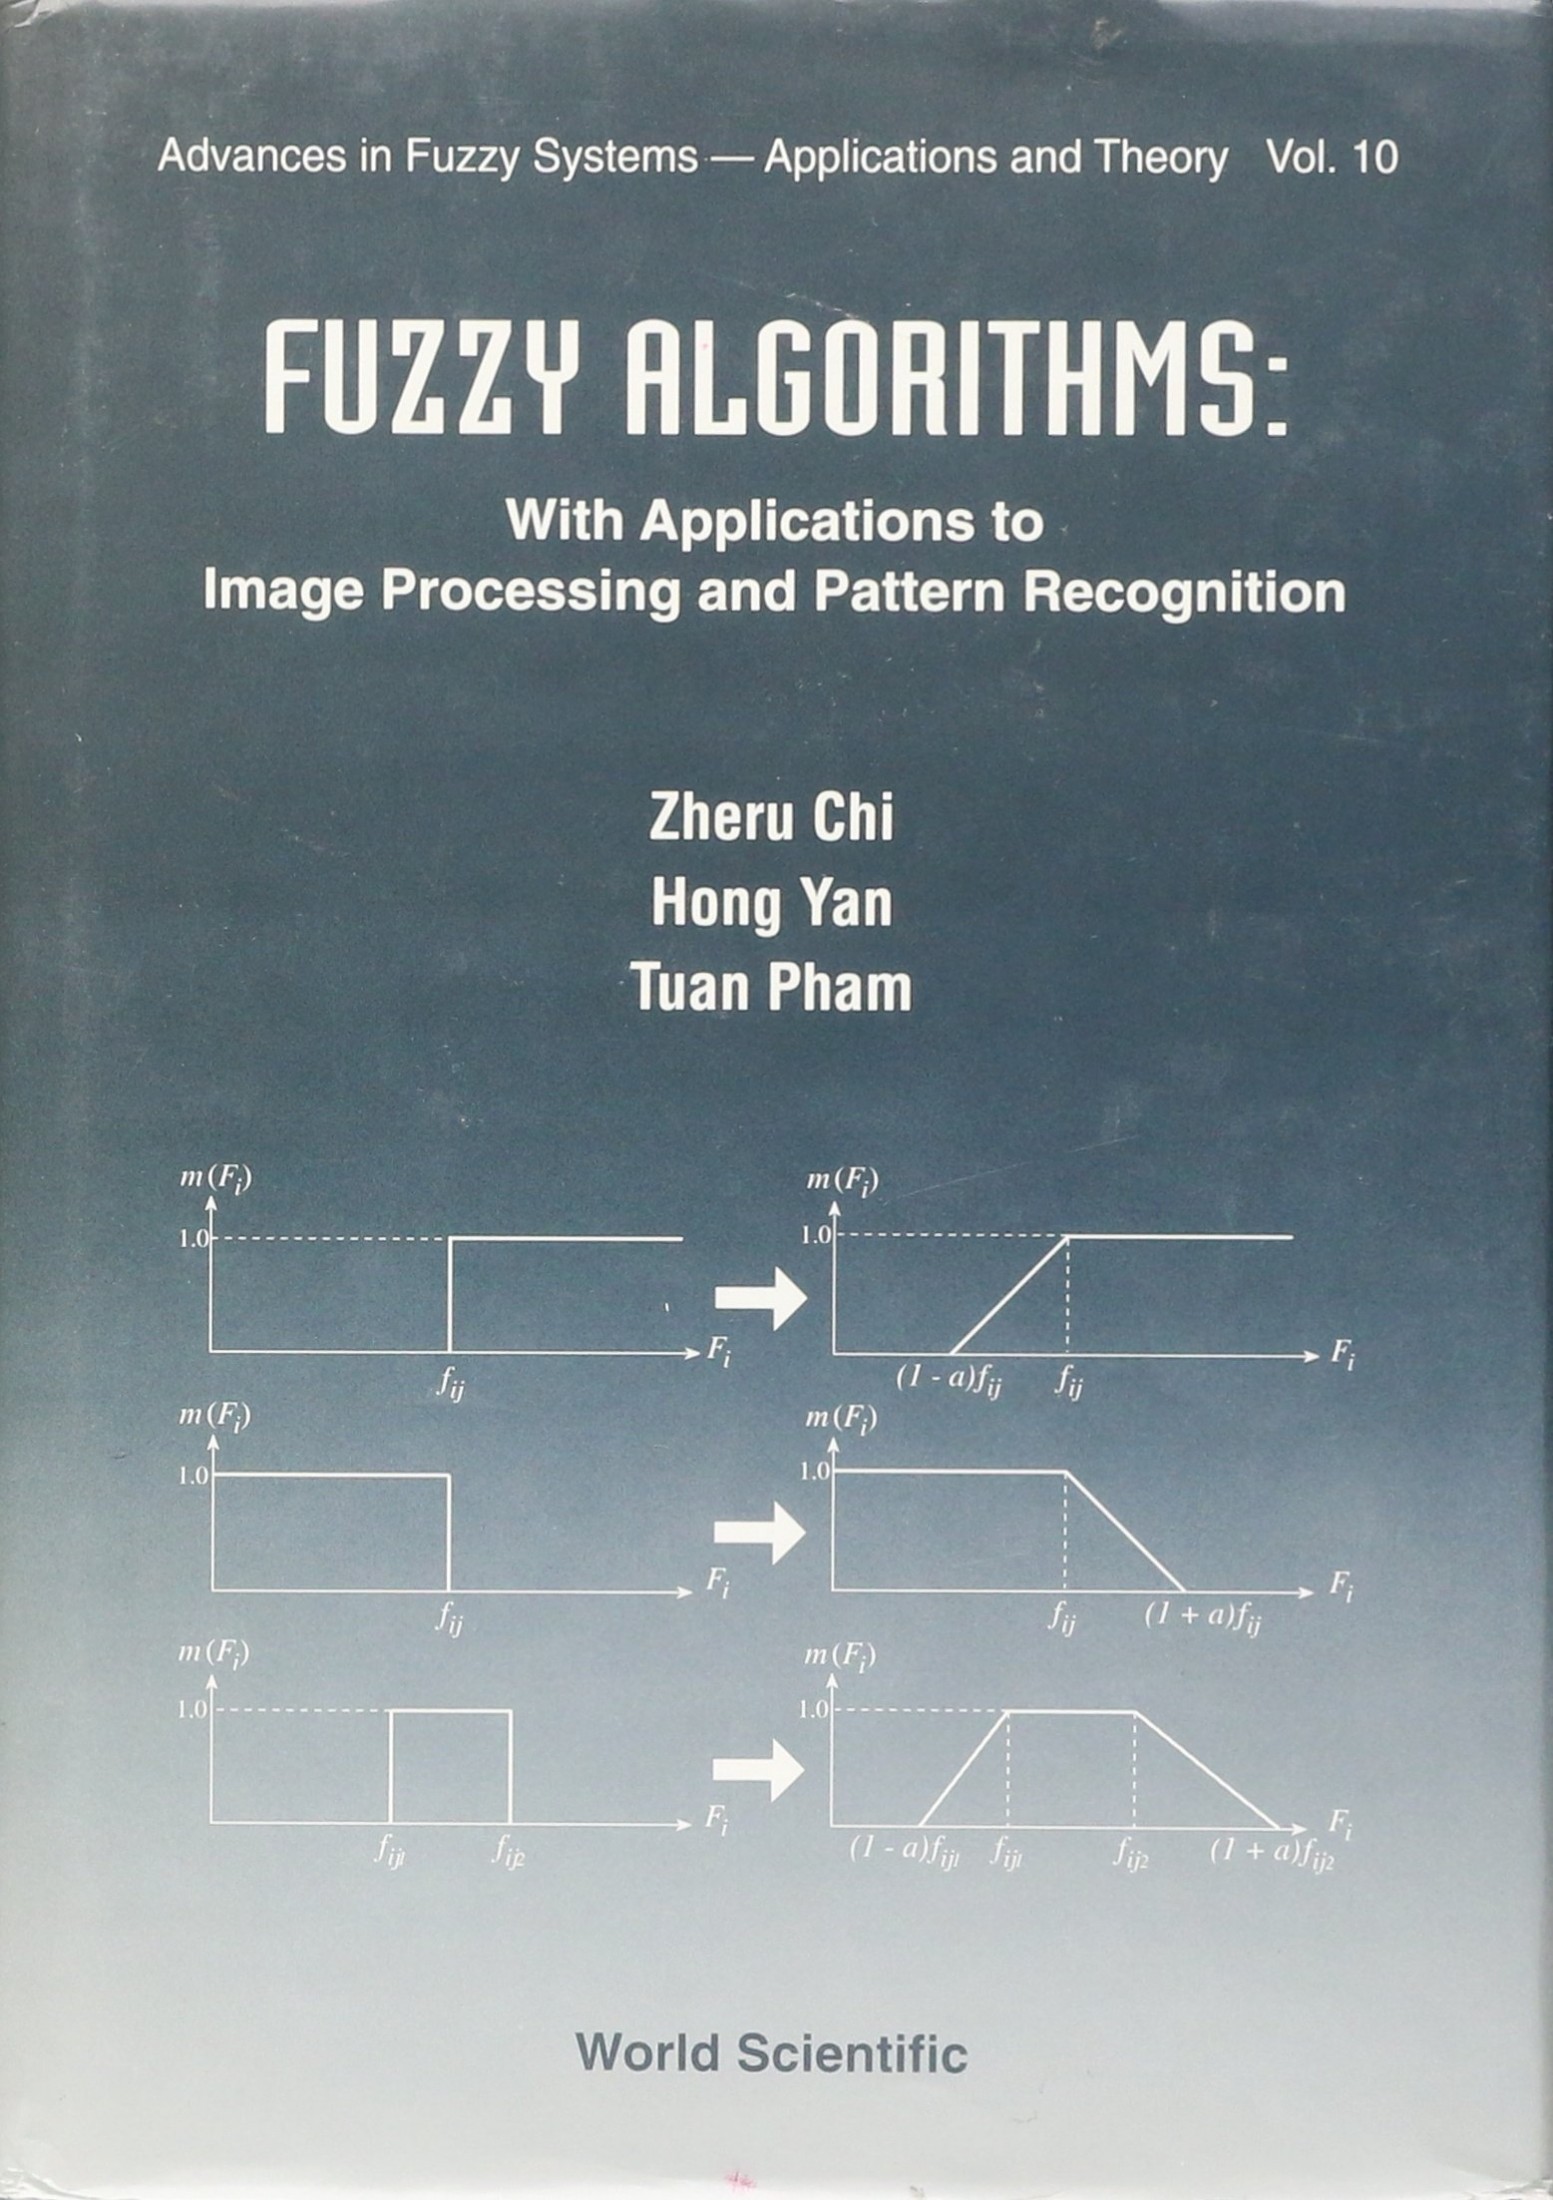 Fuzzy Algorithms: with Applications to Image Processing and Pattern Recognition